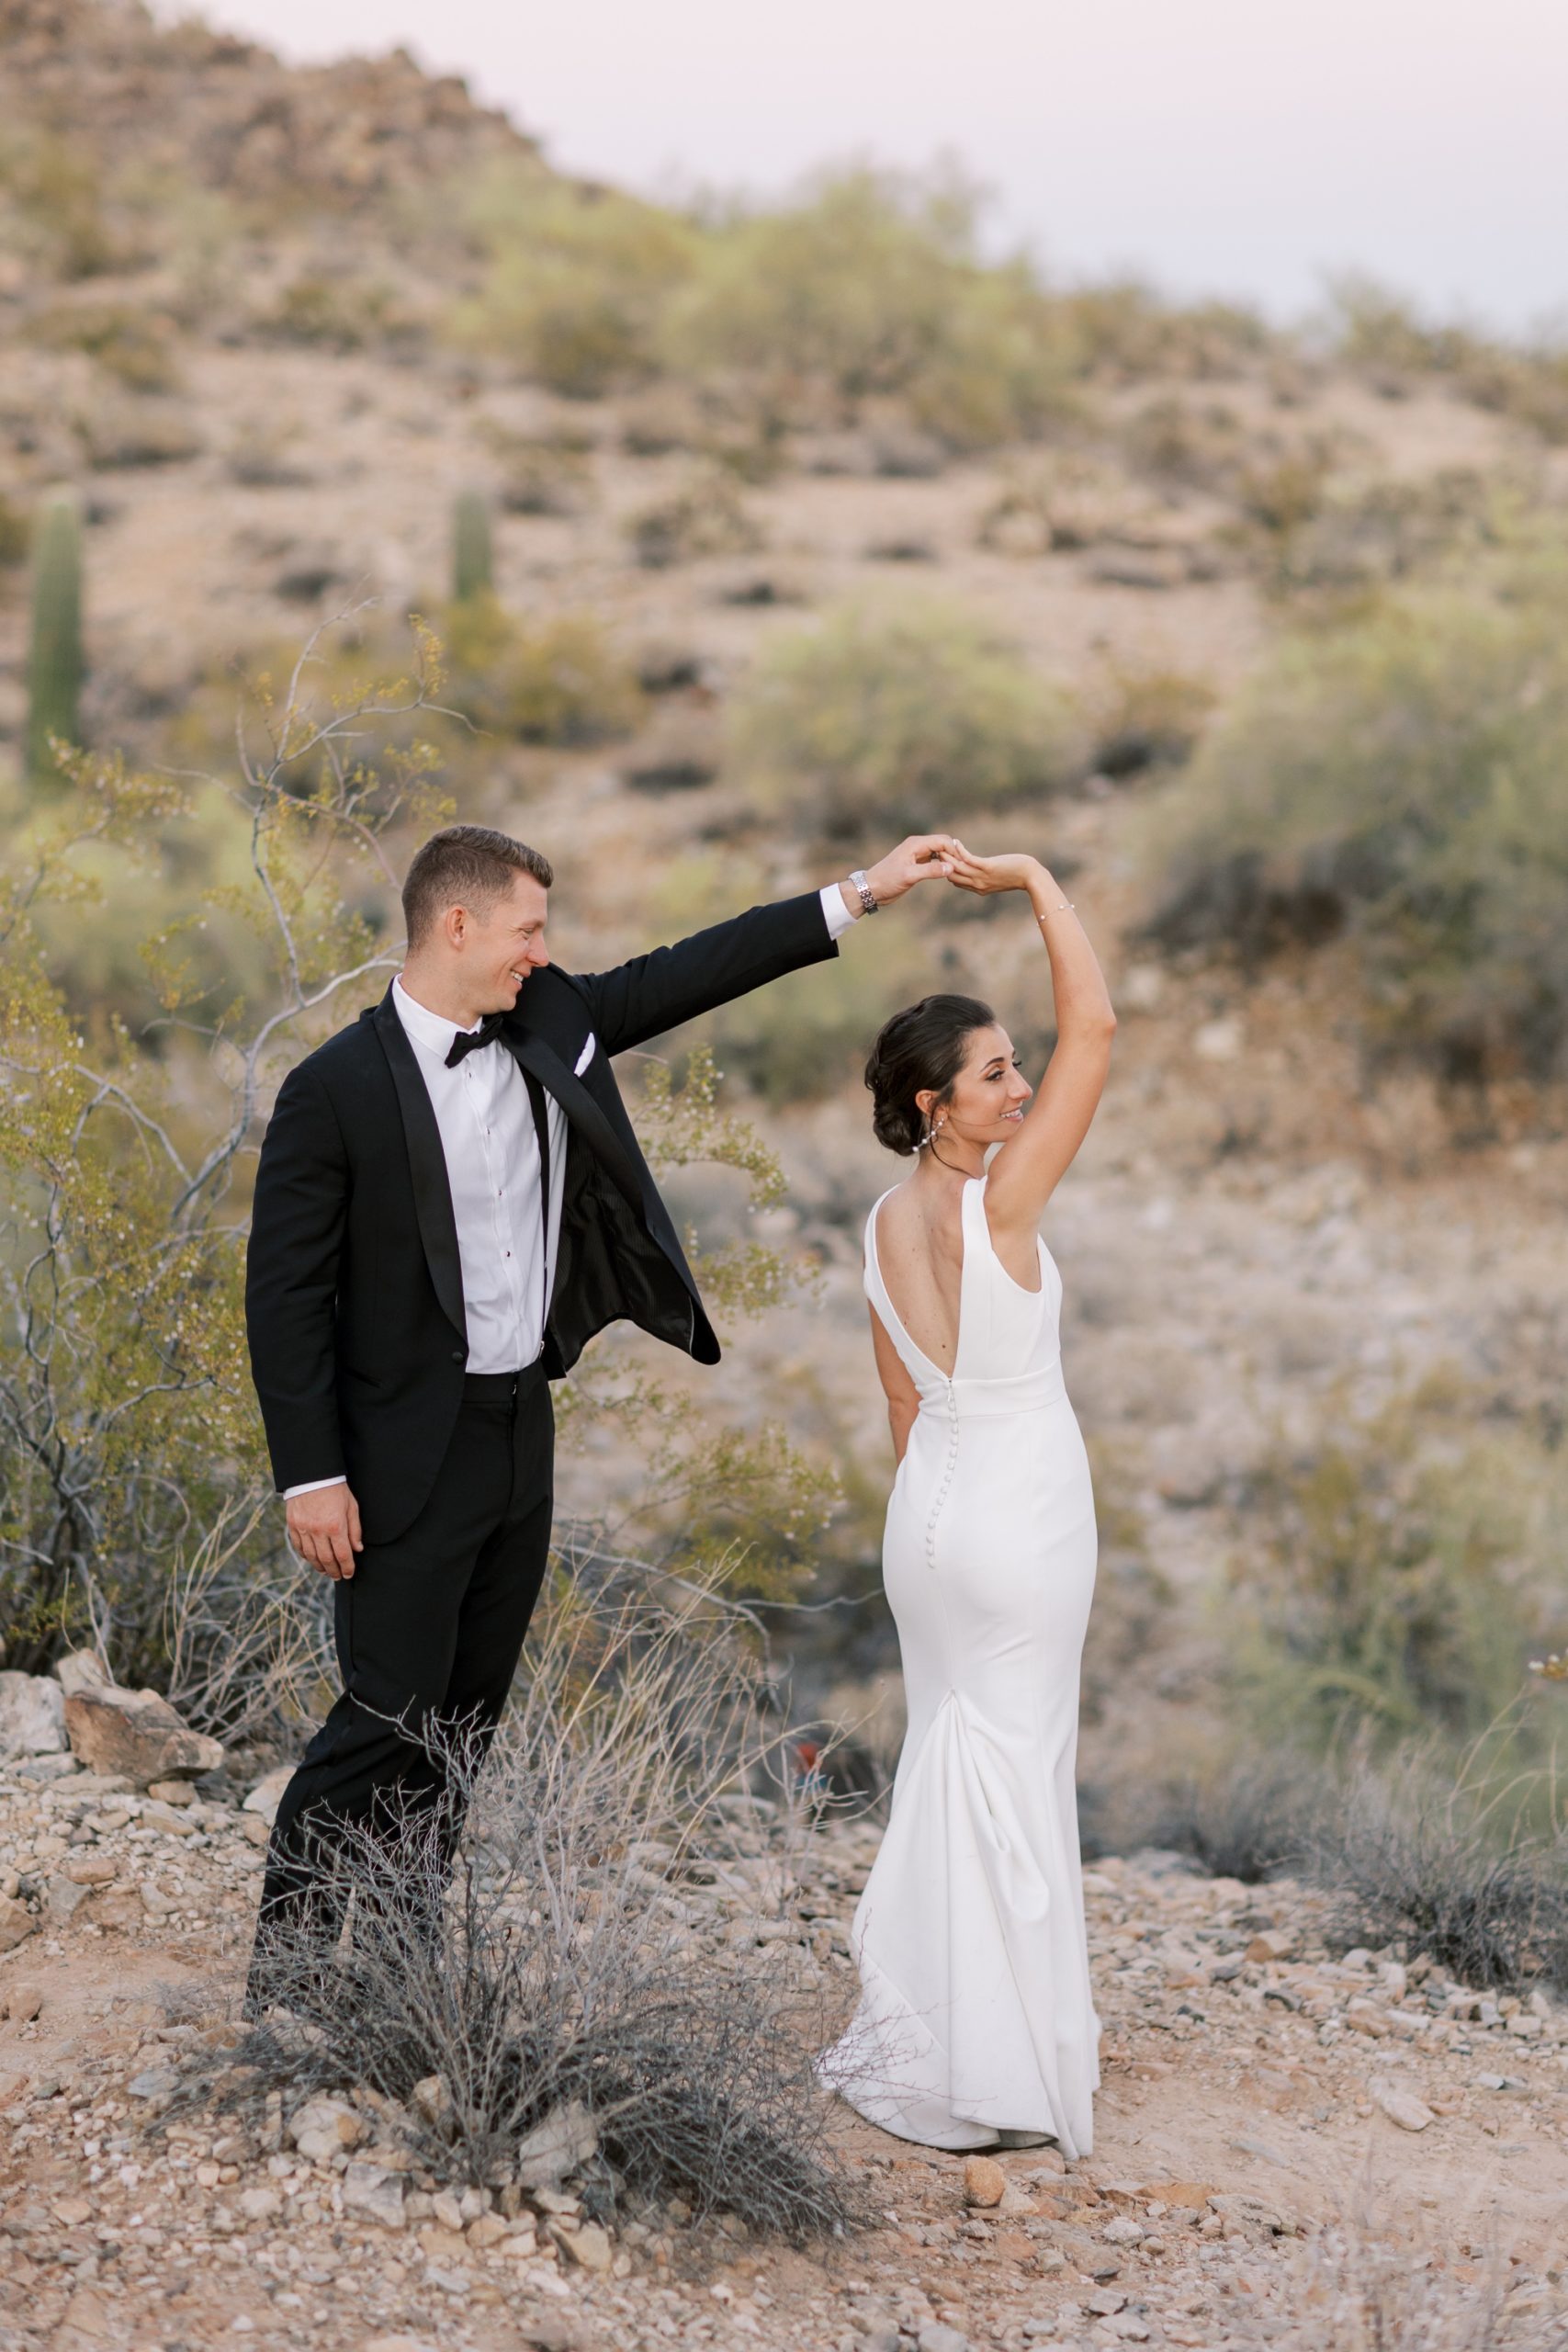 The bride and groom danced at their Camelback Inn in Scottsdale wedding